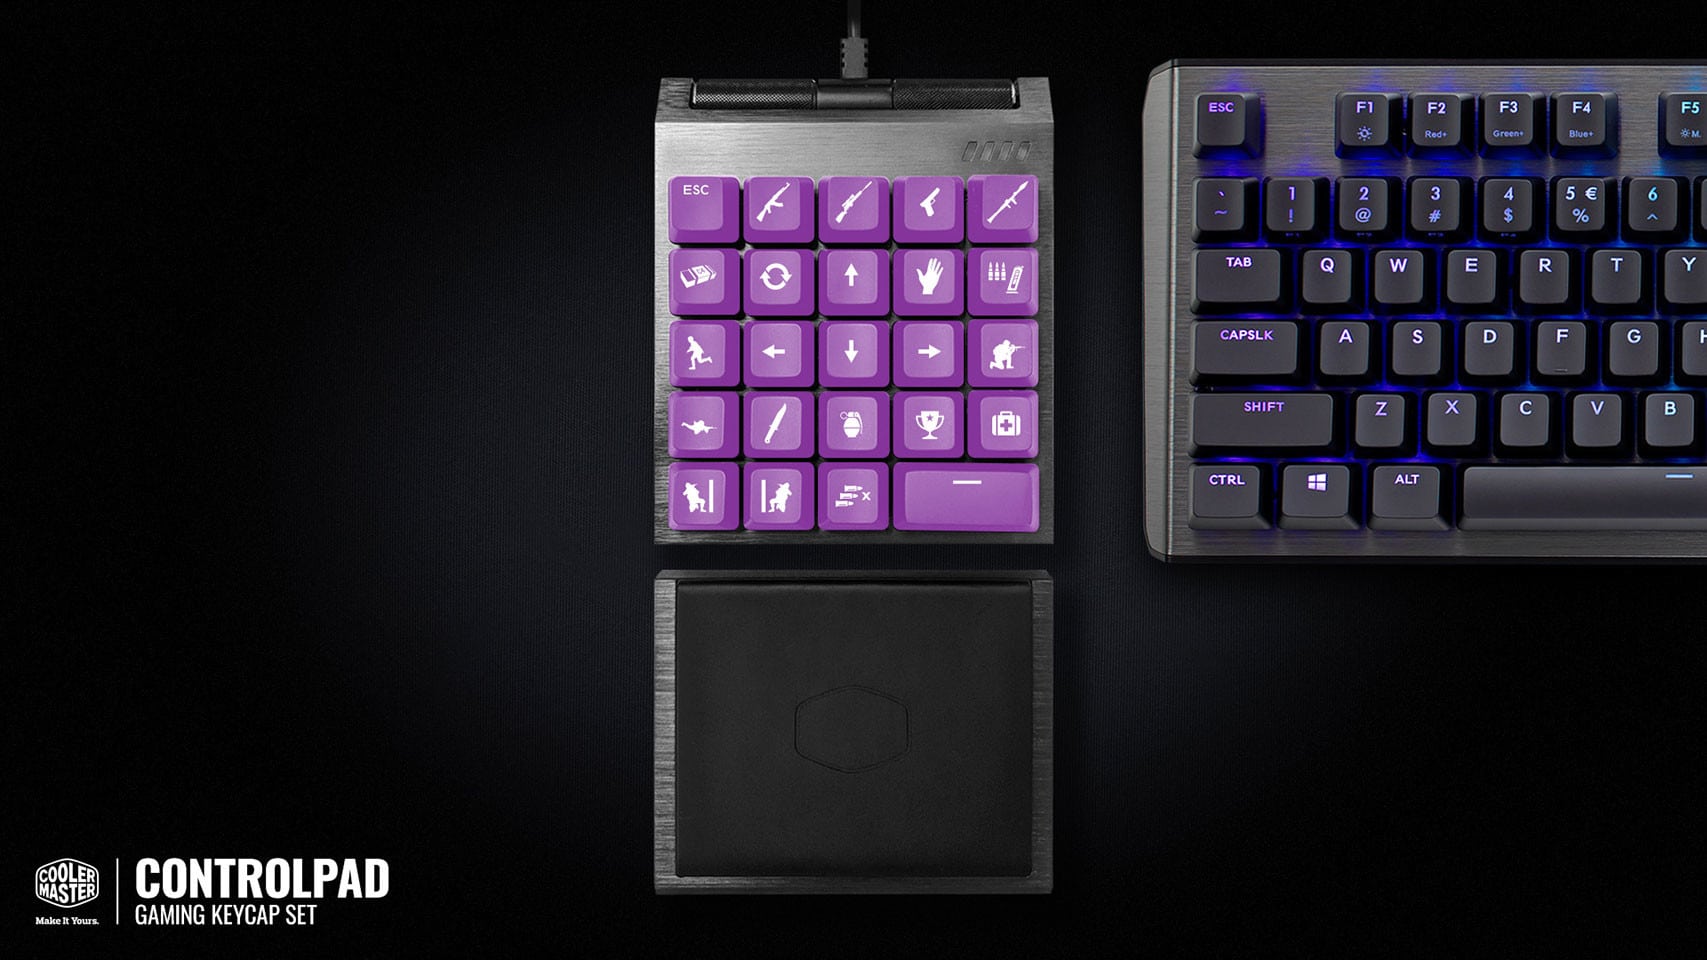 The revolutionary Controlpad combines the keyboard with the pad